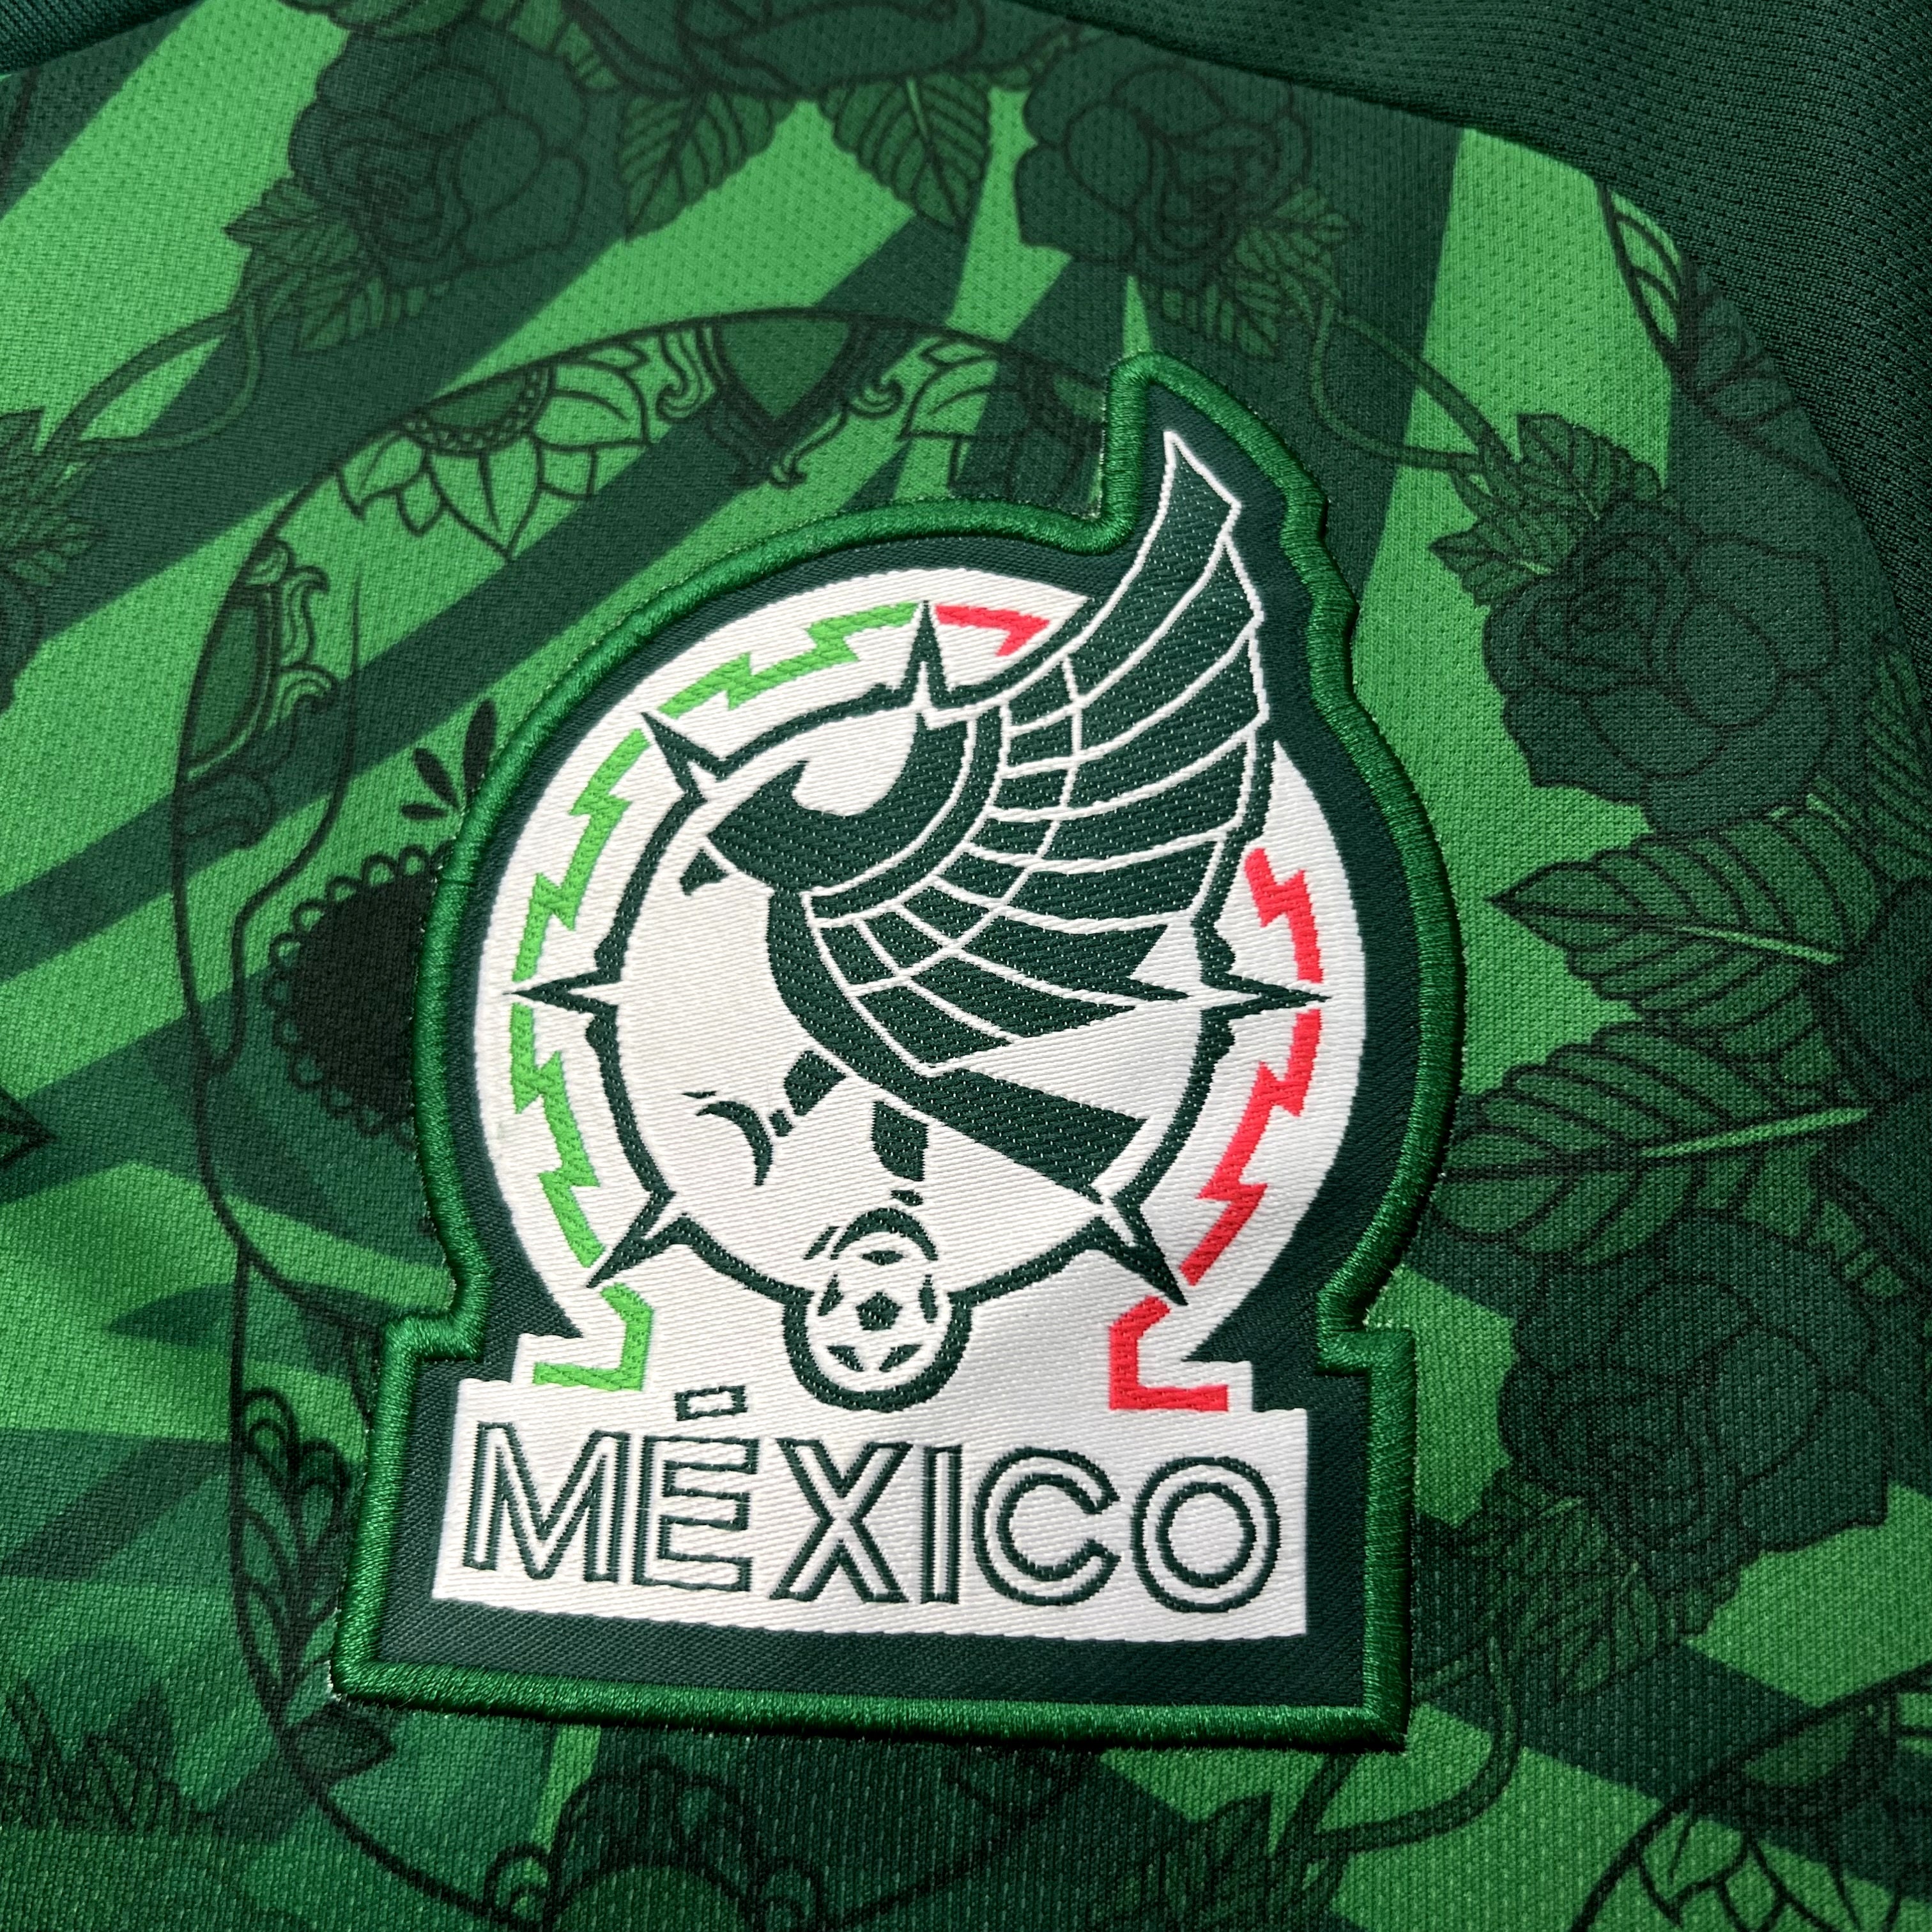 Mexico Away Jersey - 24/25